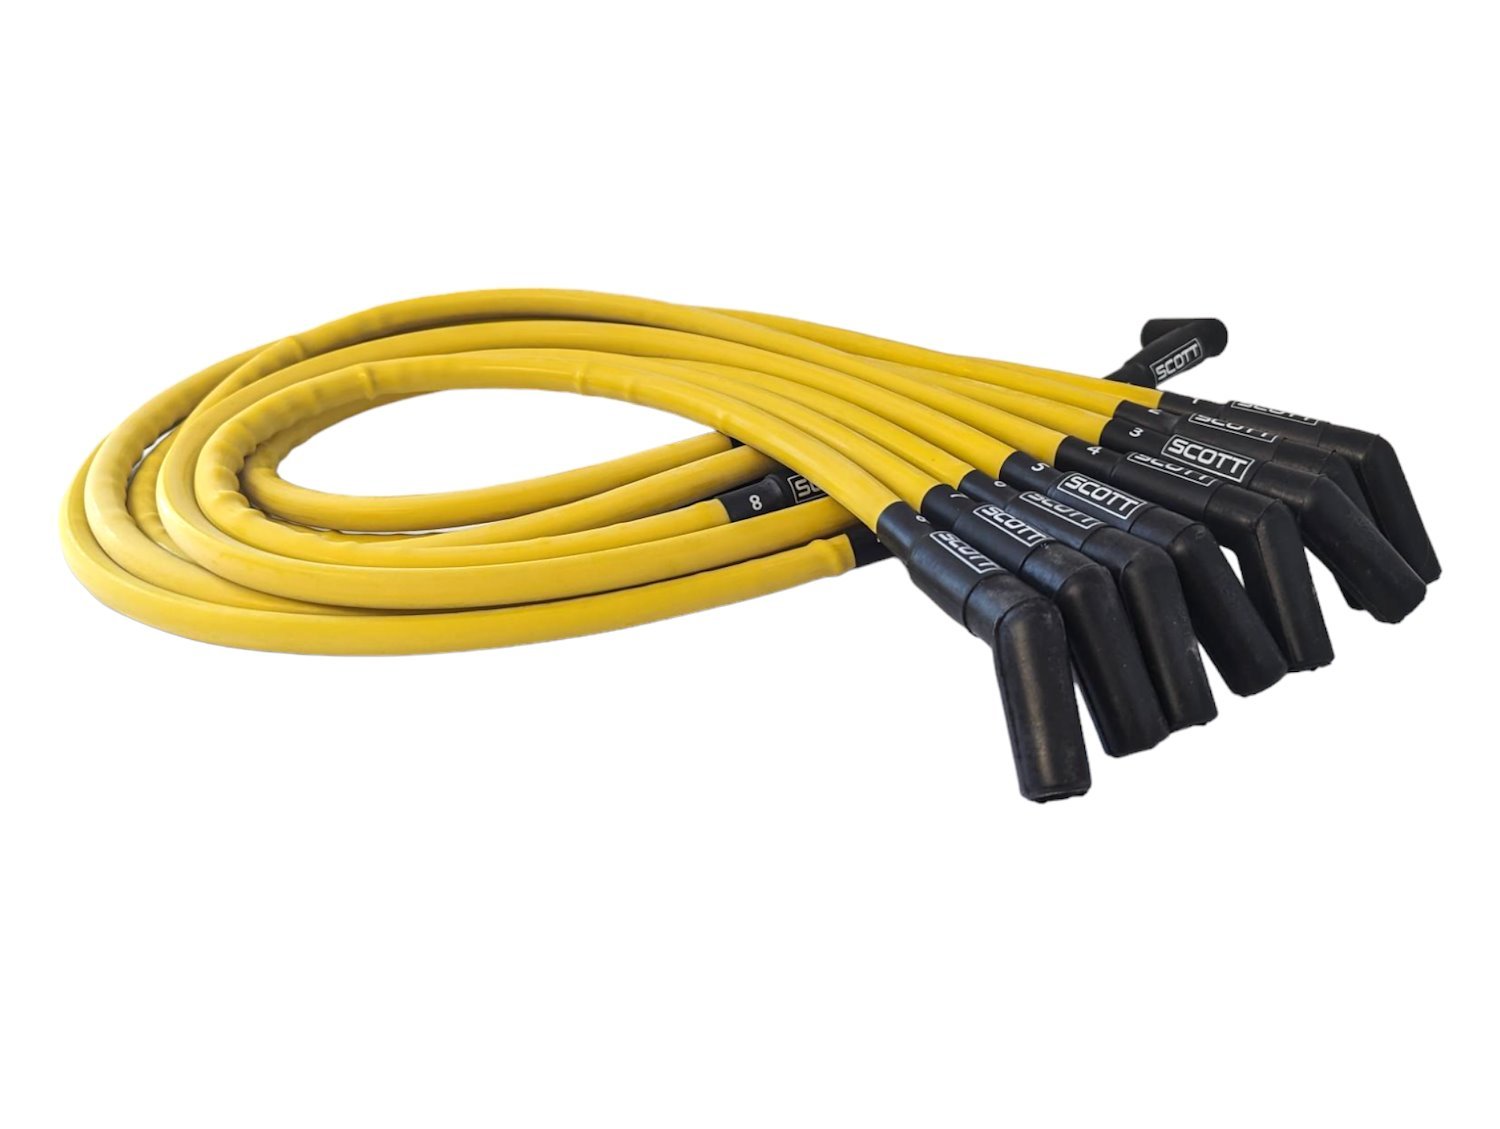 SPW-CH-415-7 High-Performance Silicone-Sleeved Spark Plug Wire Set for Big Block Chevy, Over Valve Cover [Yellow]